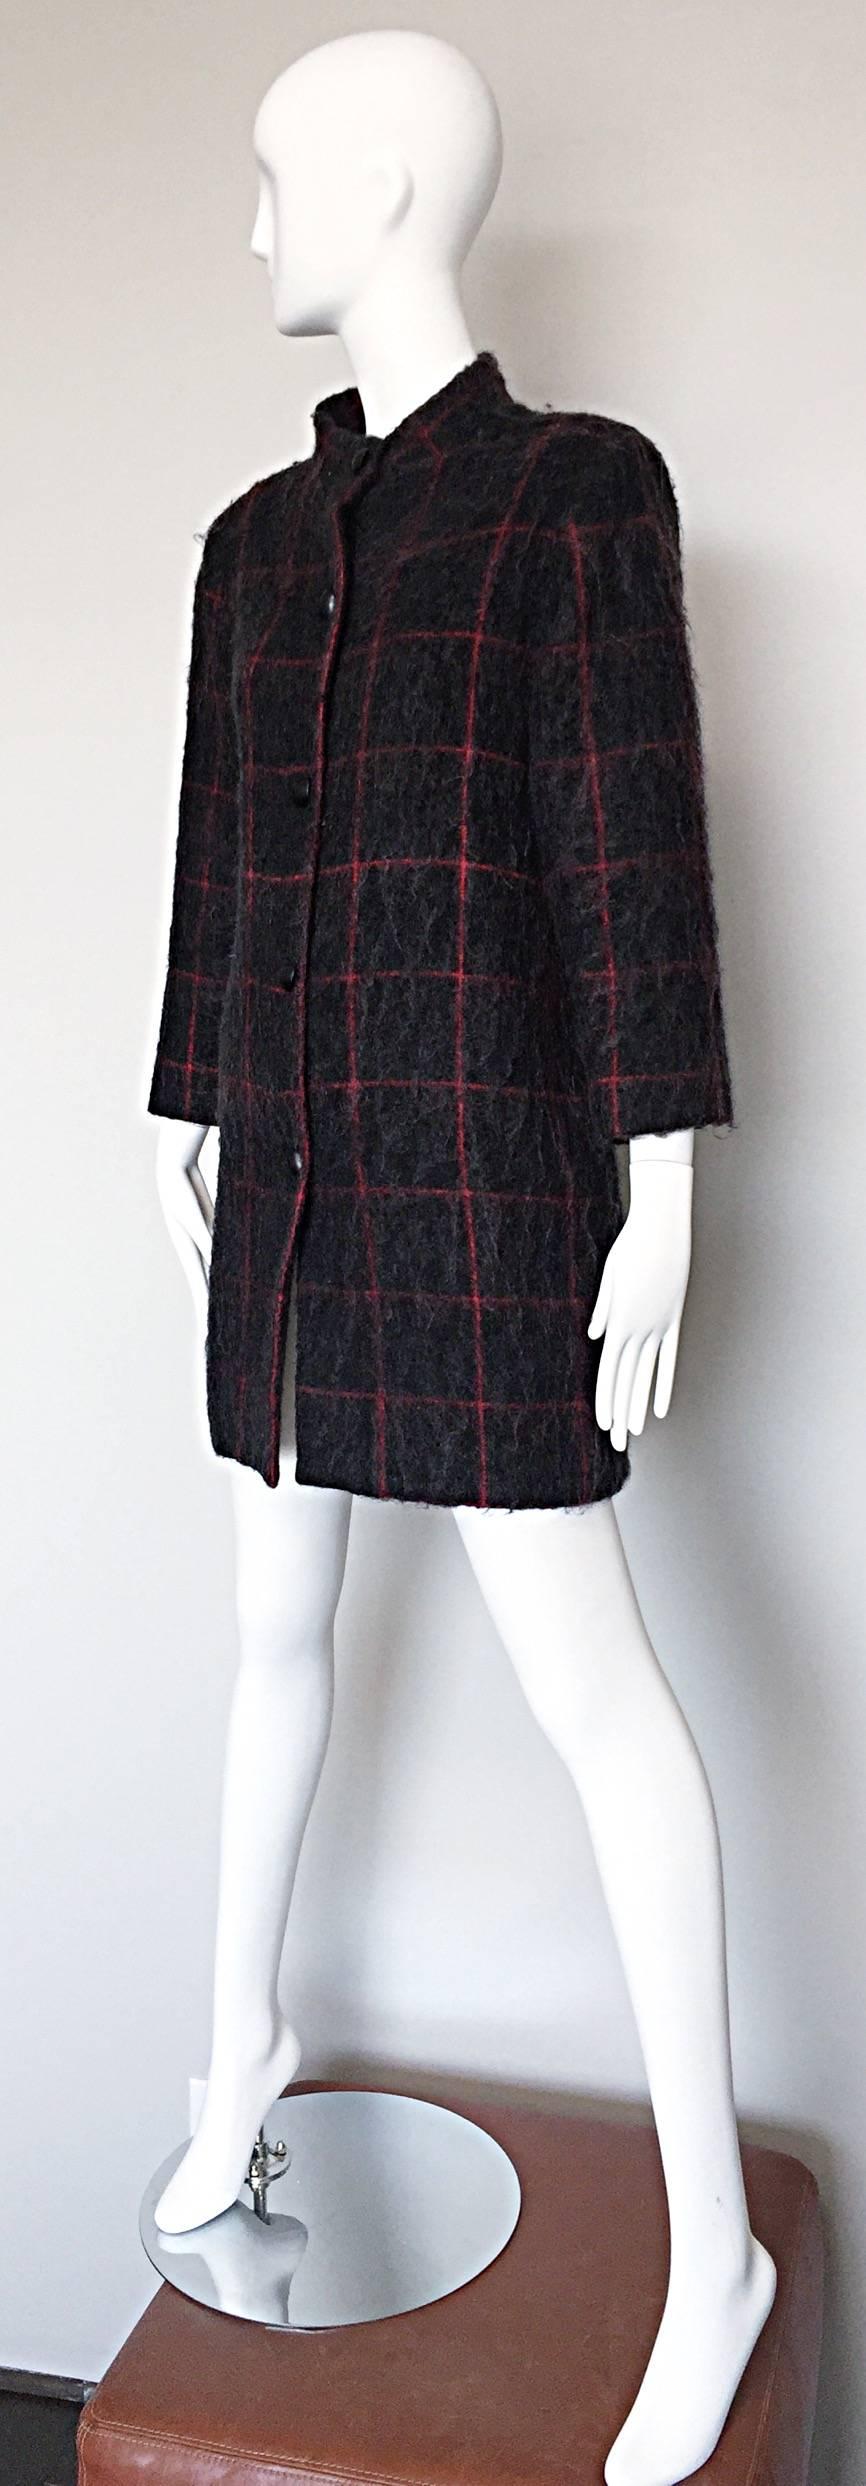 Vintage Geoffrey Beene Beene Bag Grey + Red Plaid Mohair Wool Swing Jacket Coat In Excellent Condition For Sale In San Diego, CA